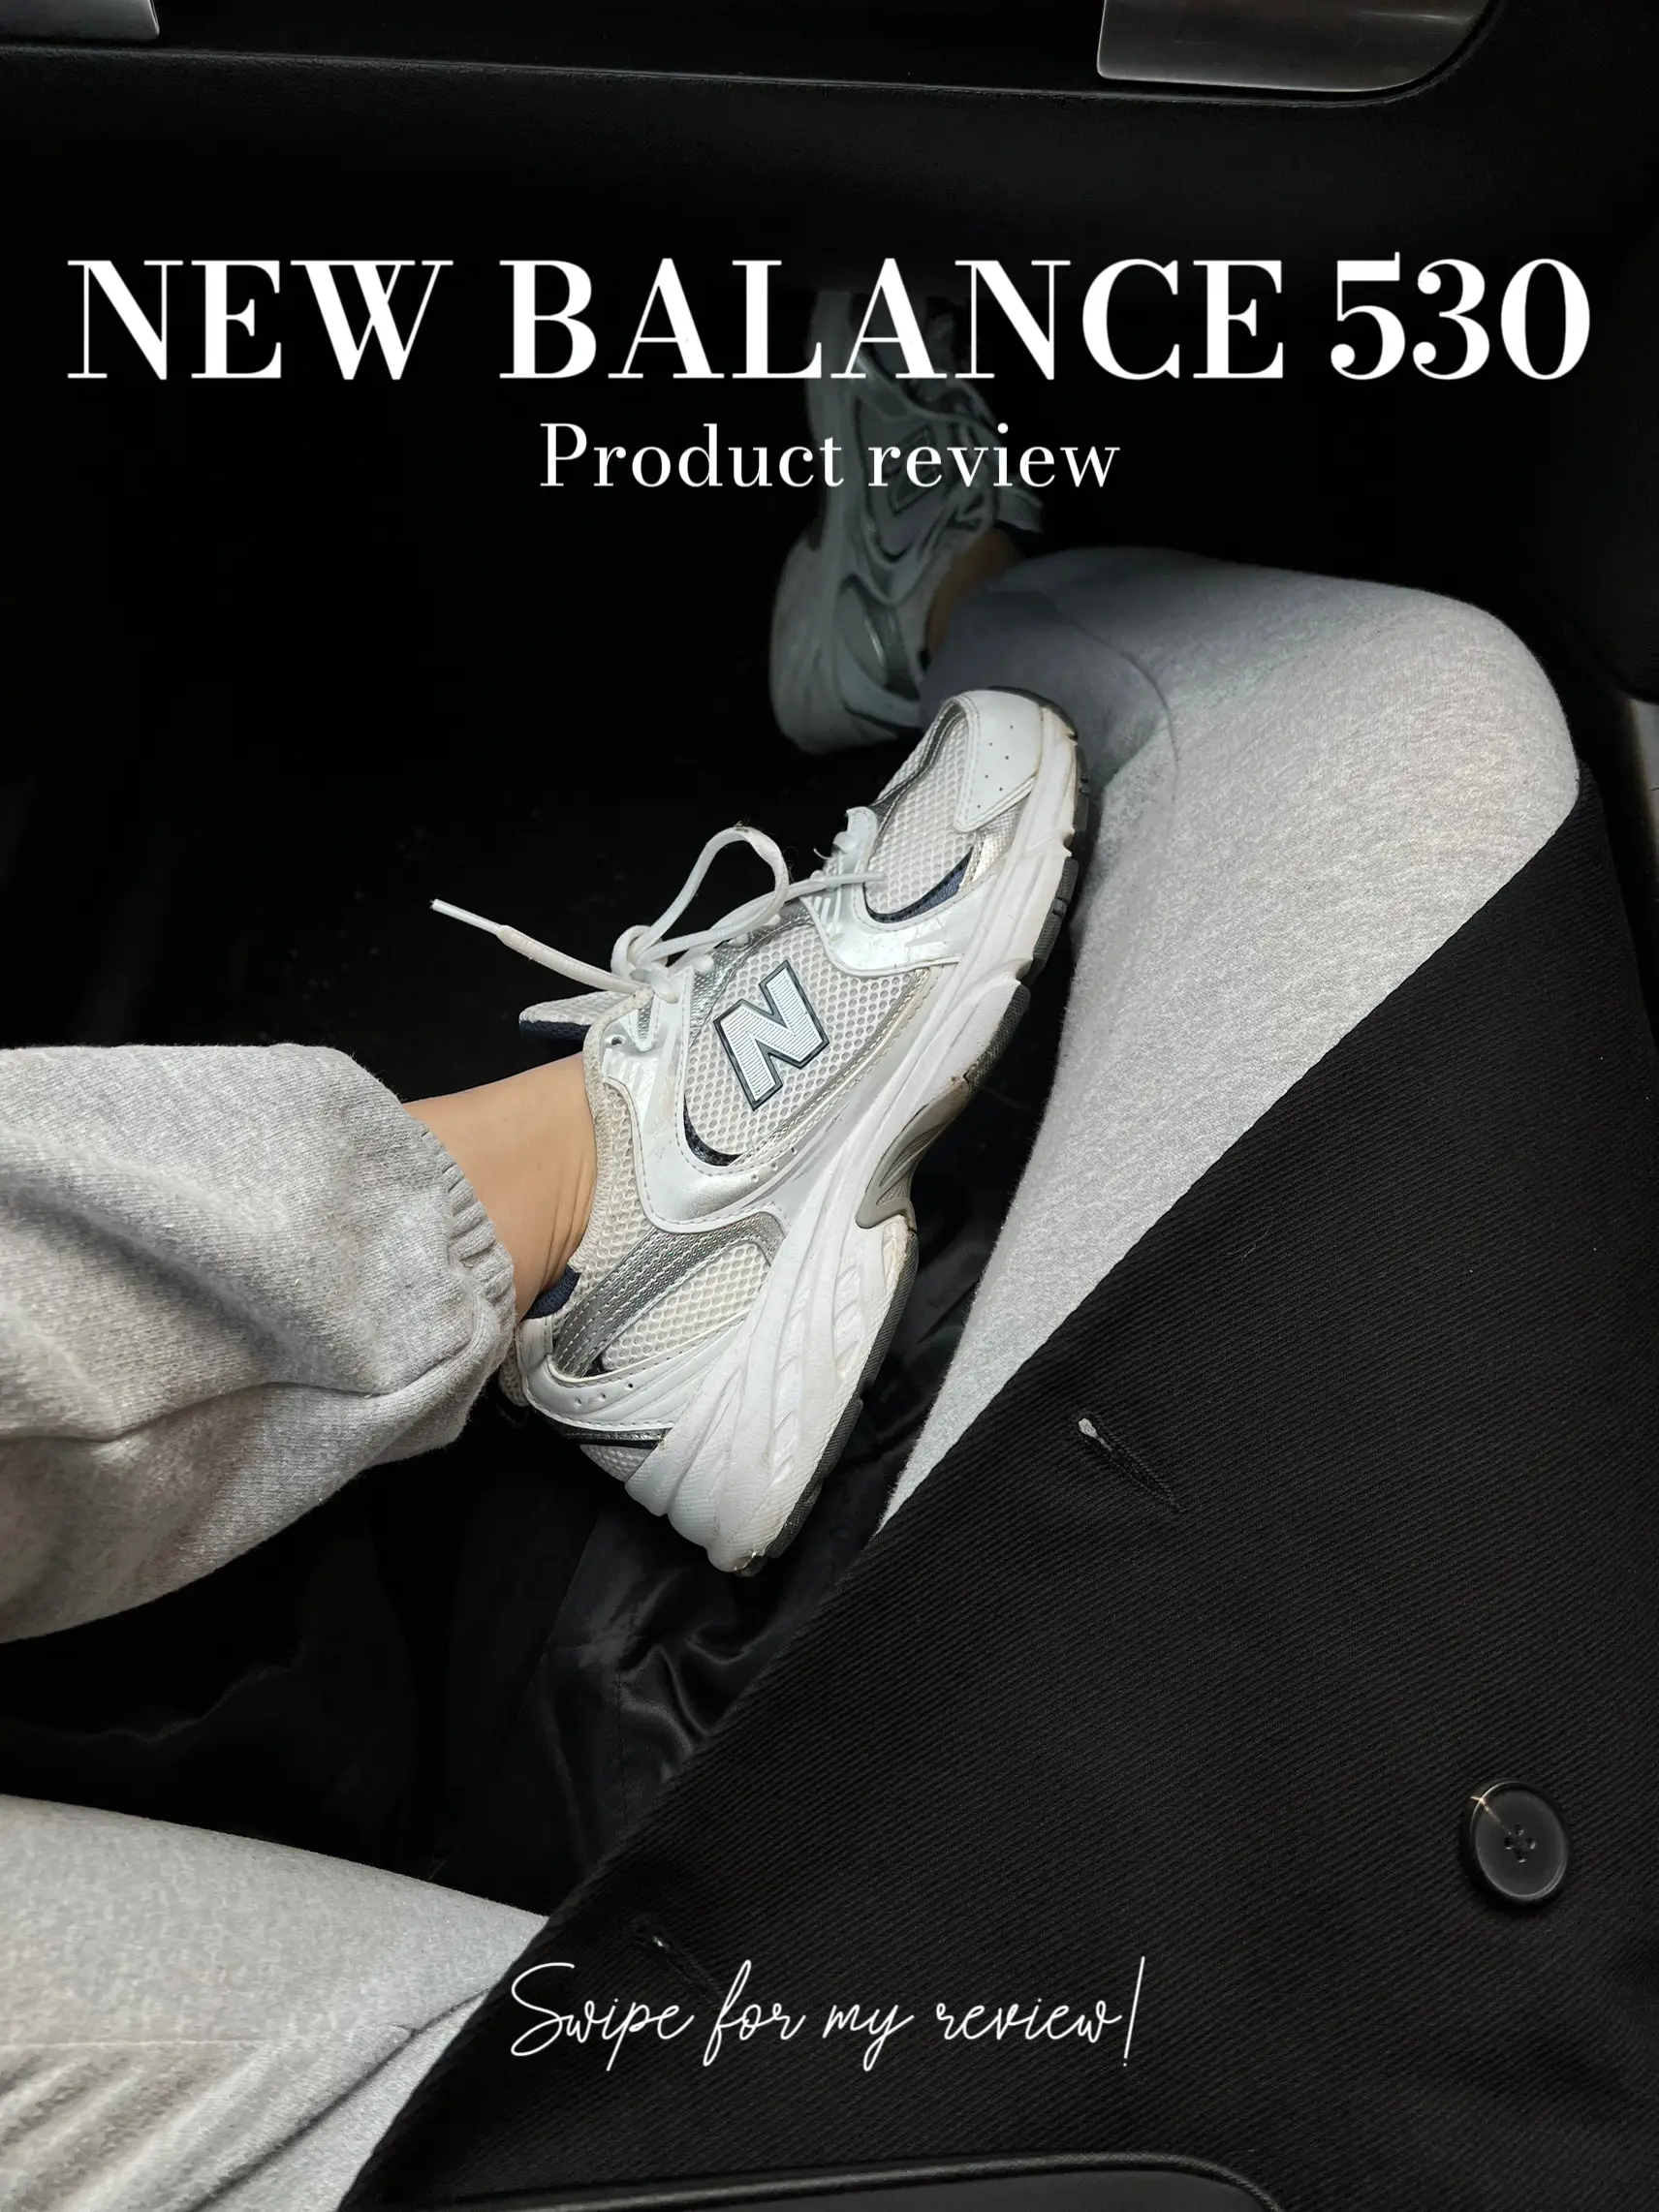 Product review, new balance 530, Gallery posted by sian